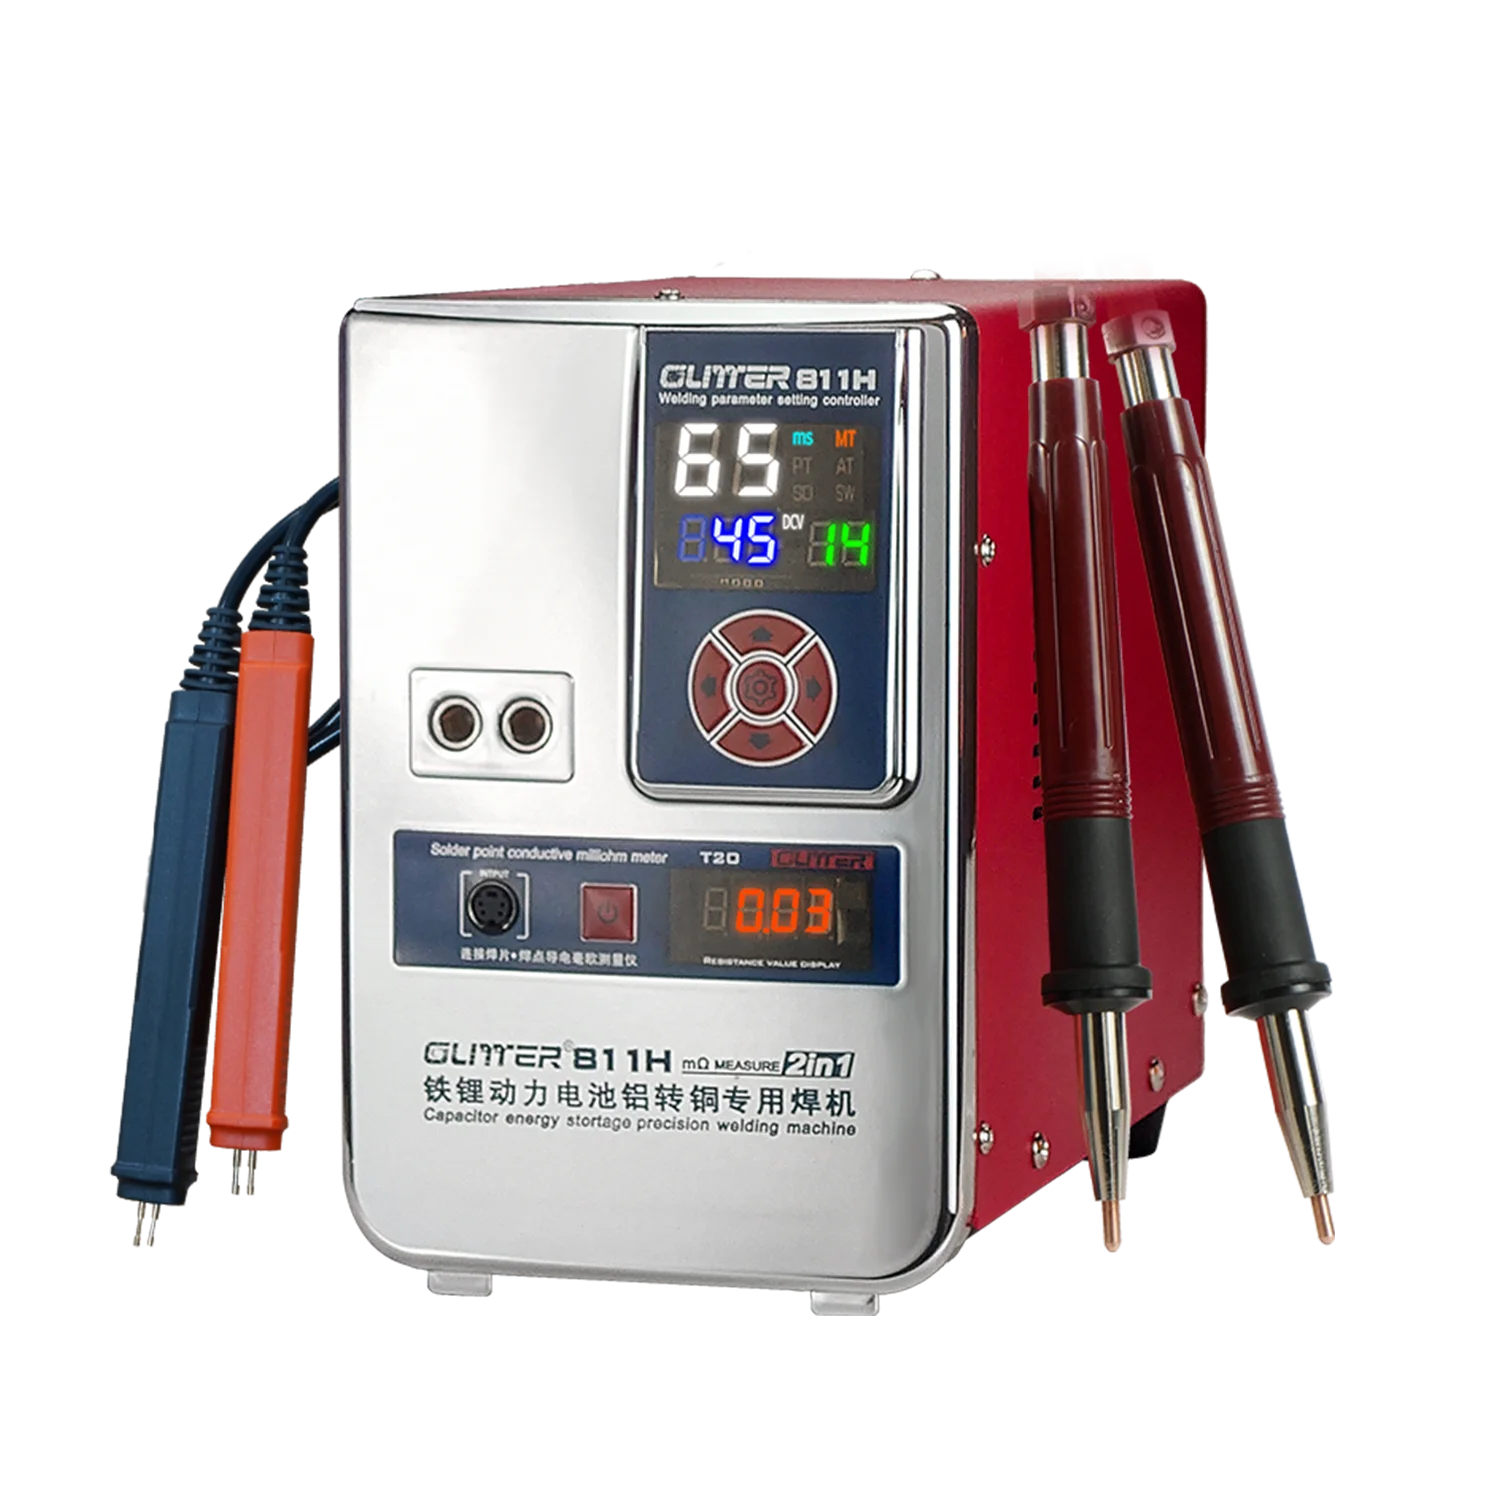 811H energy storage battery spot welding machine 42KW 7000A max weld 0.45mm copper lithium for Outdoor power supply battery